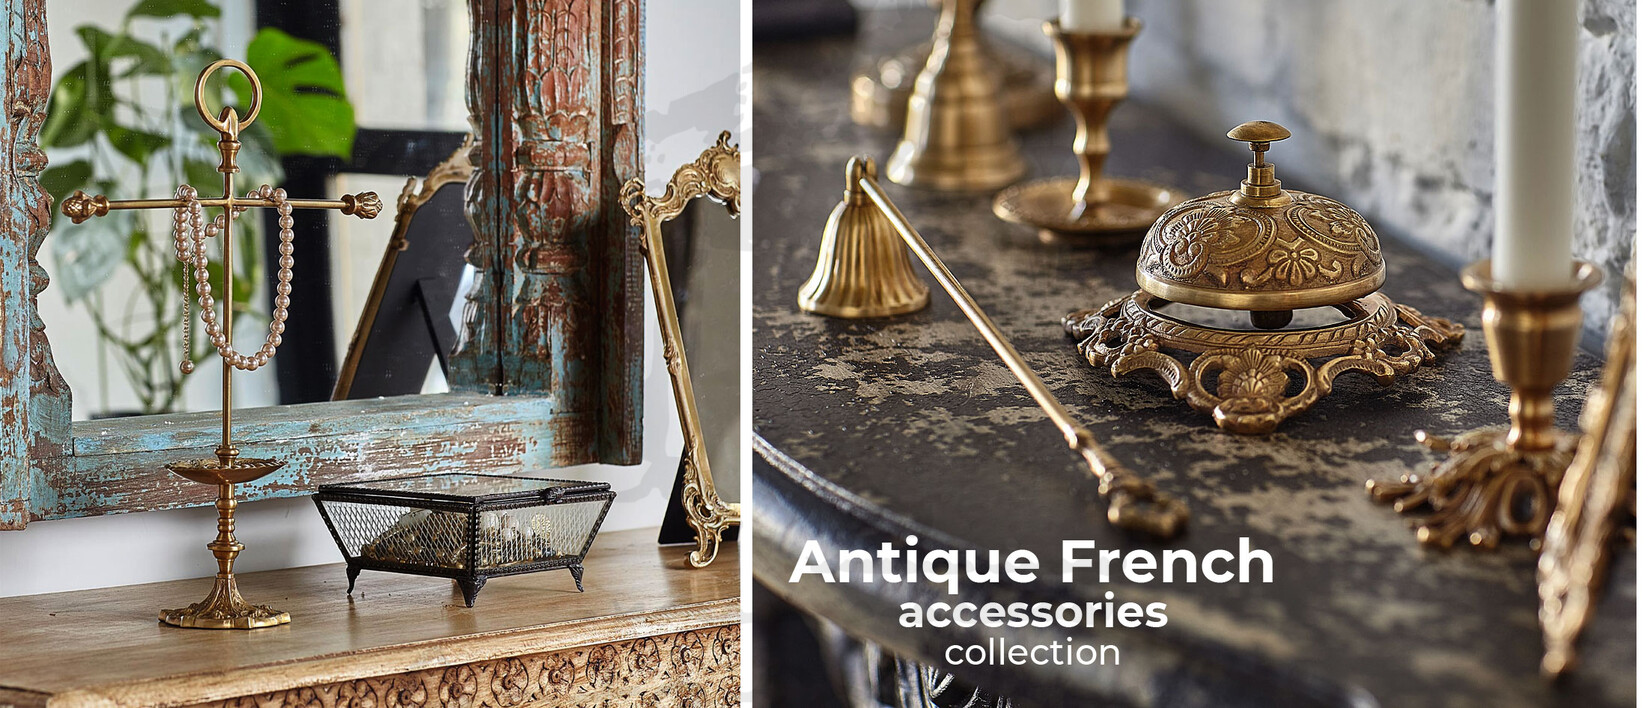 Antique French accessories